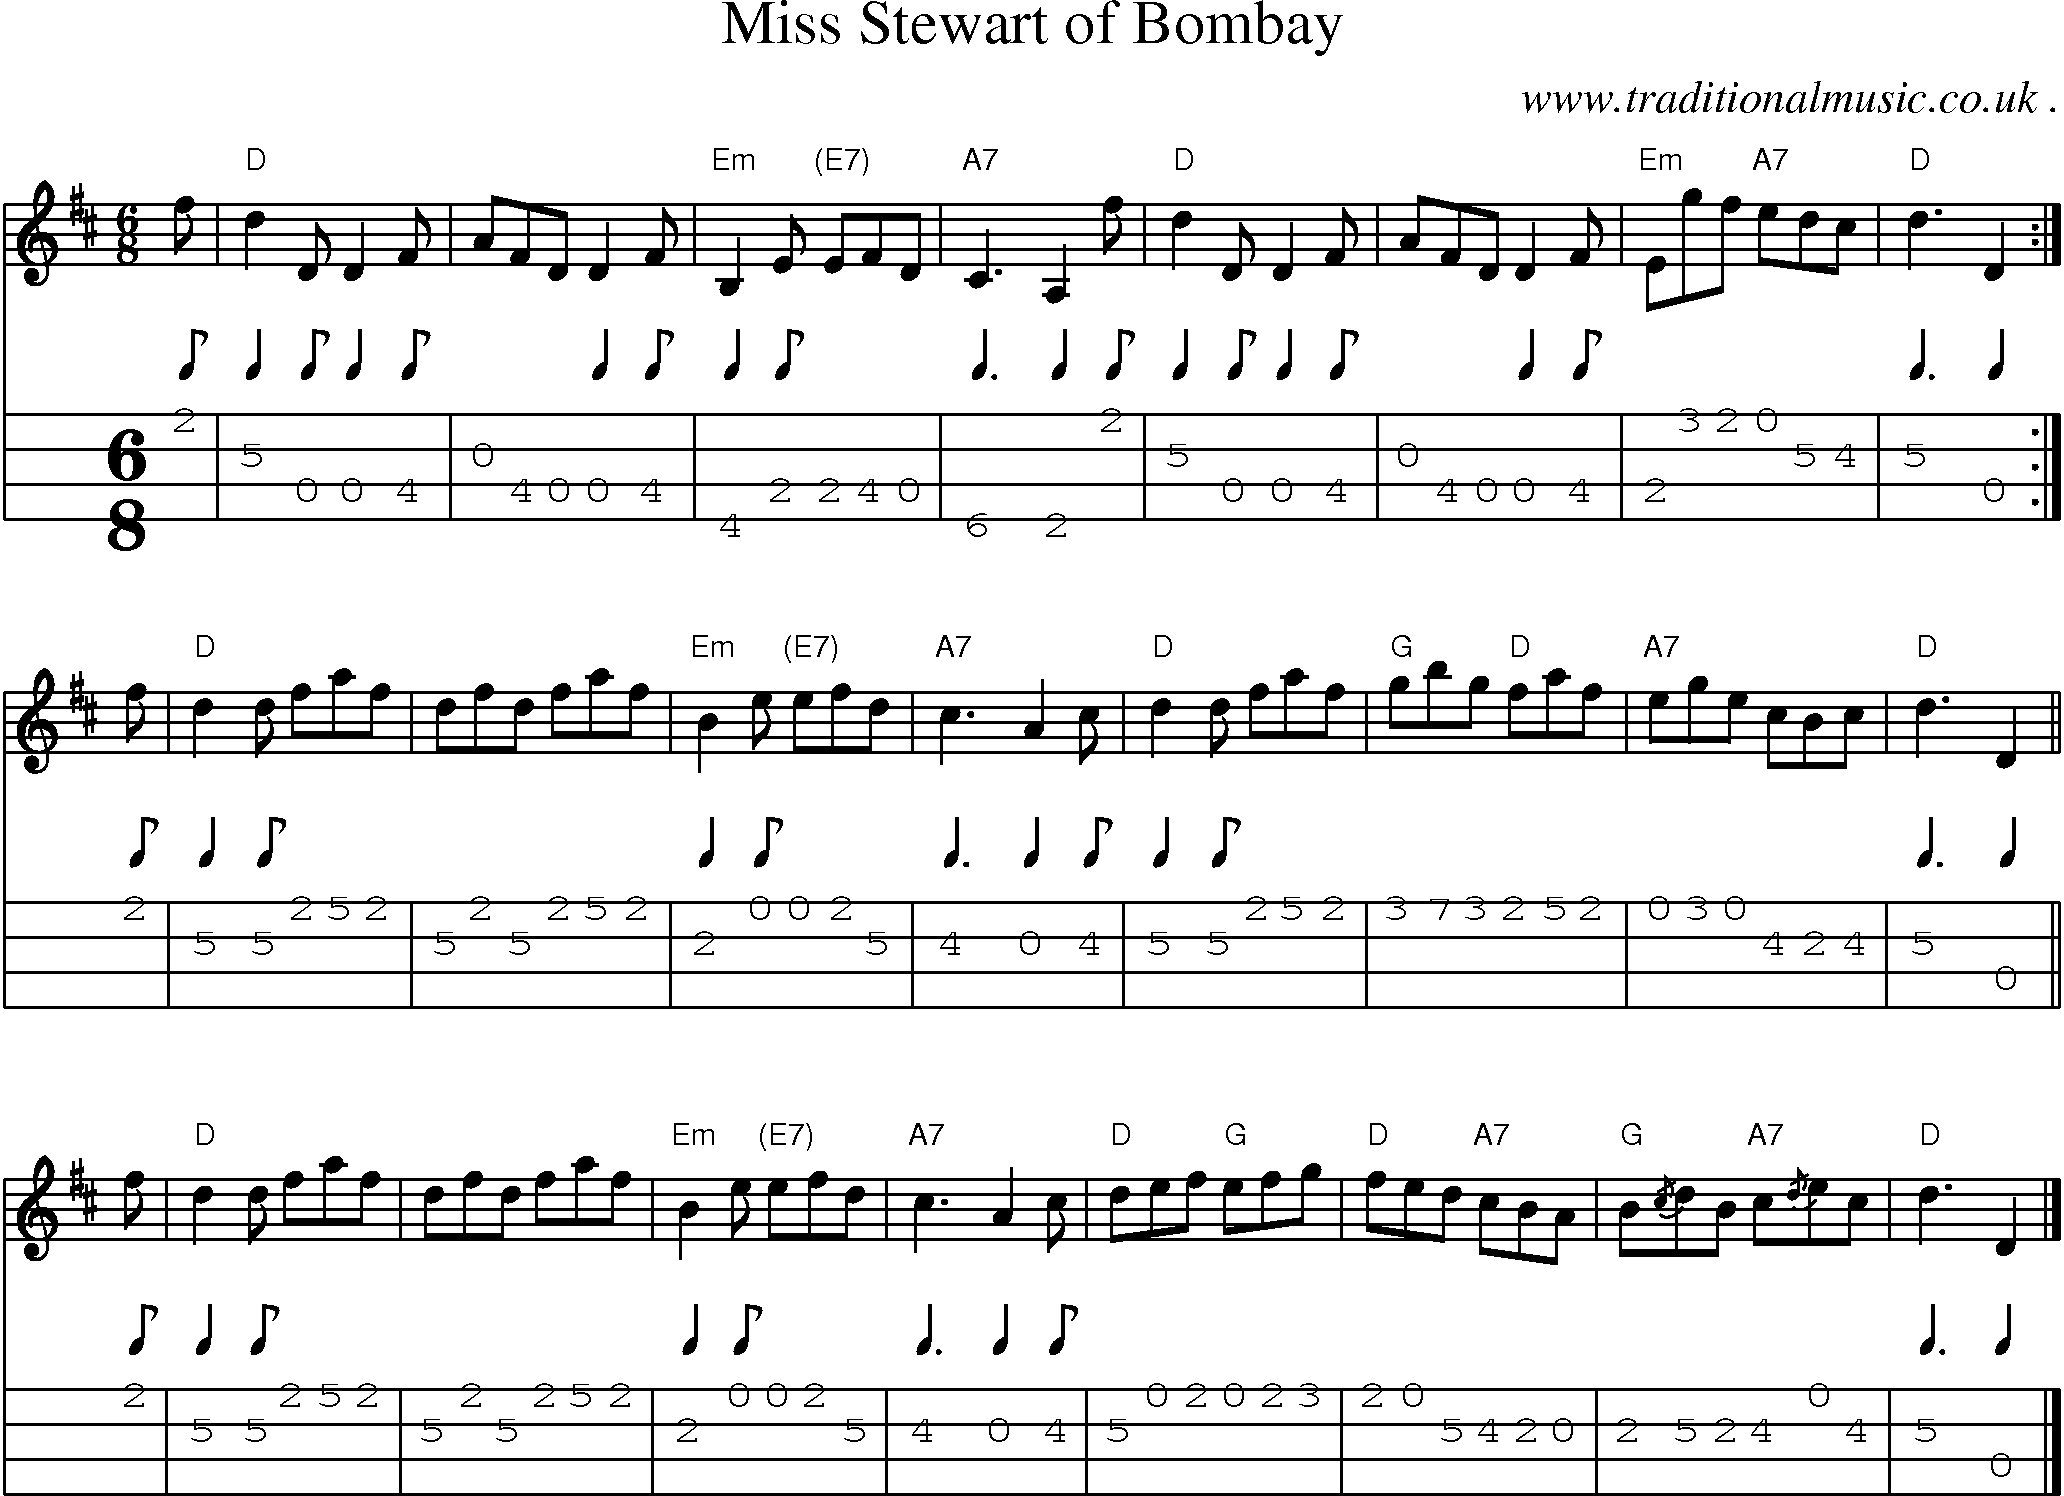 Sheet-music  score, Chords and Mandolin Tabs for Miss Stewart Of Bombay